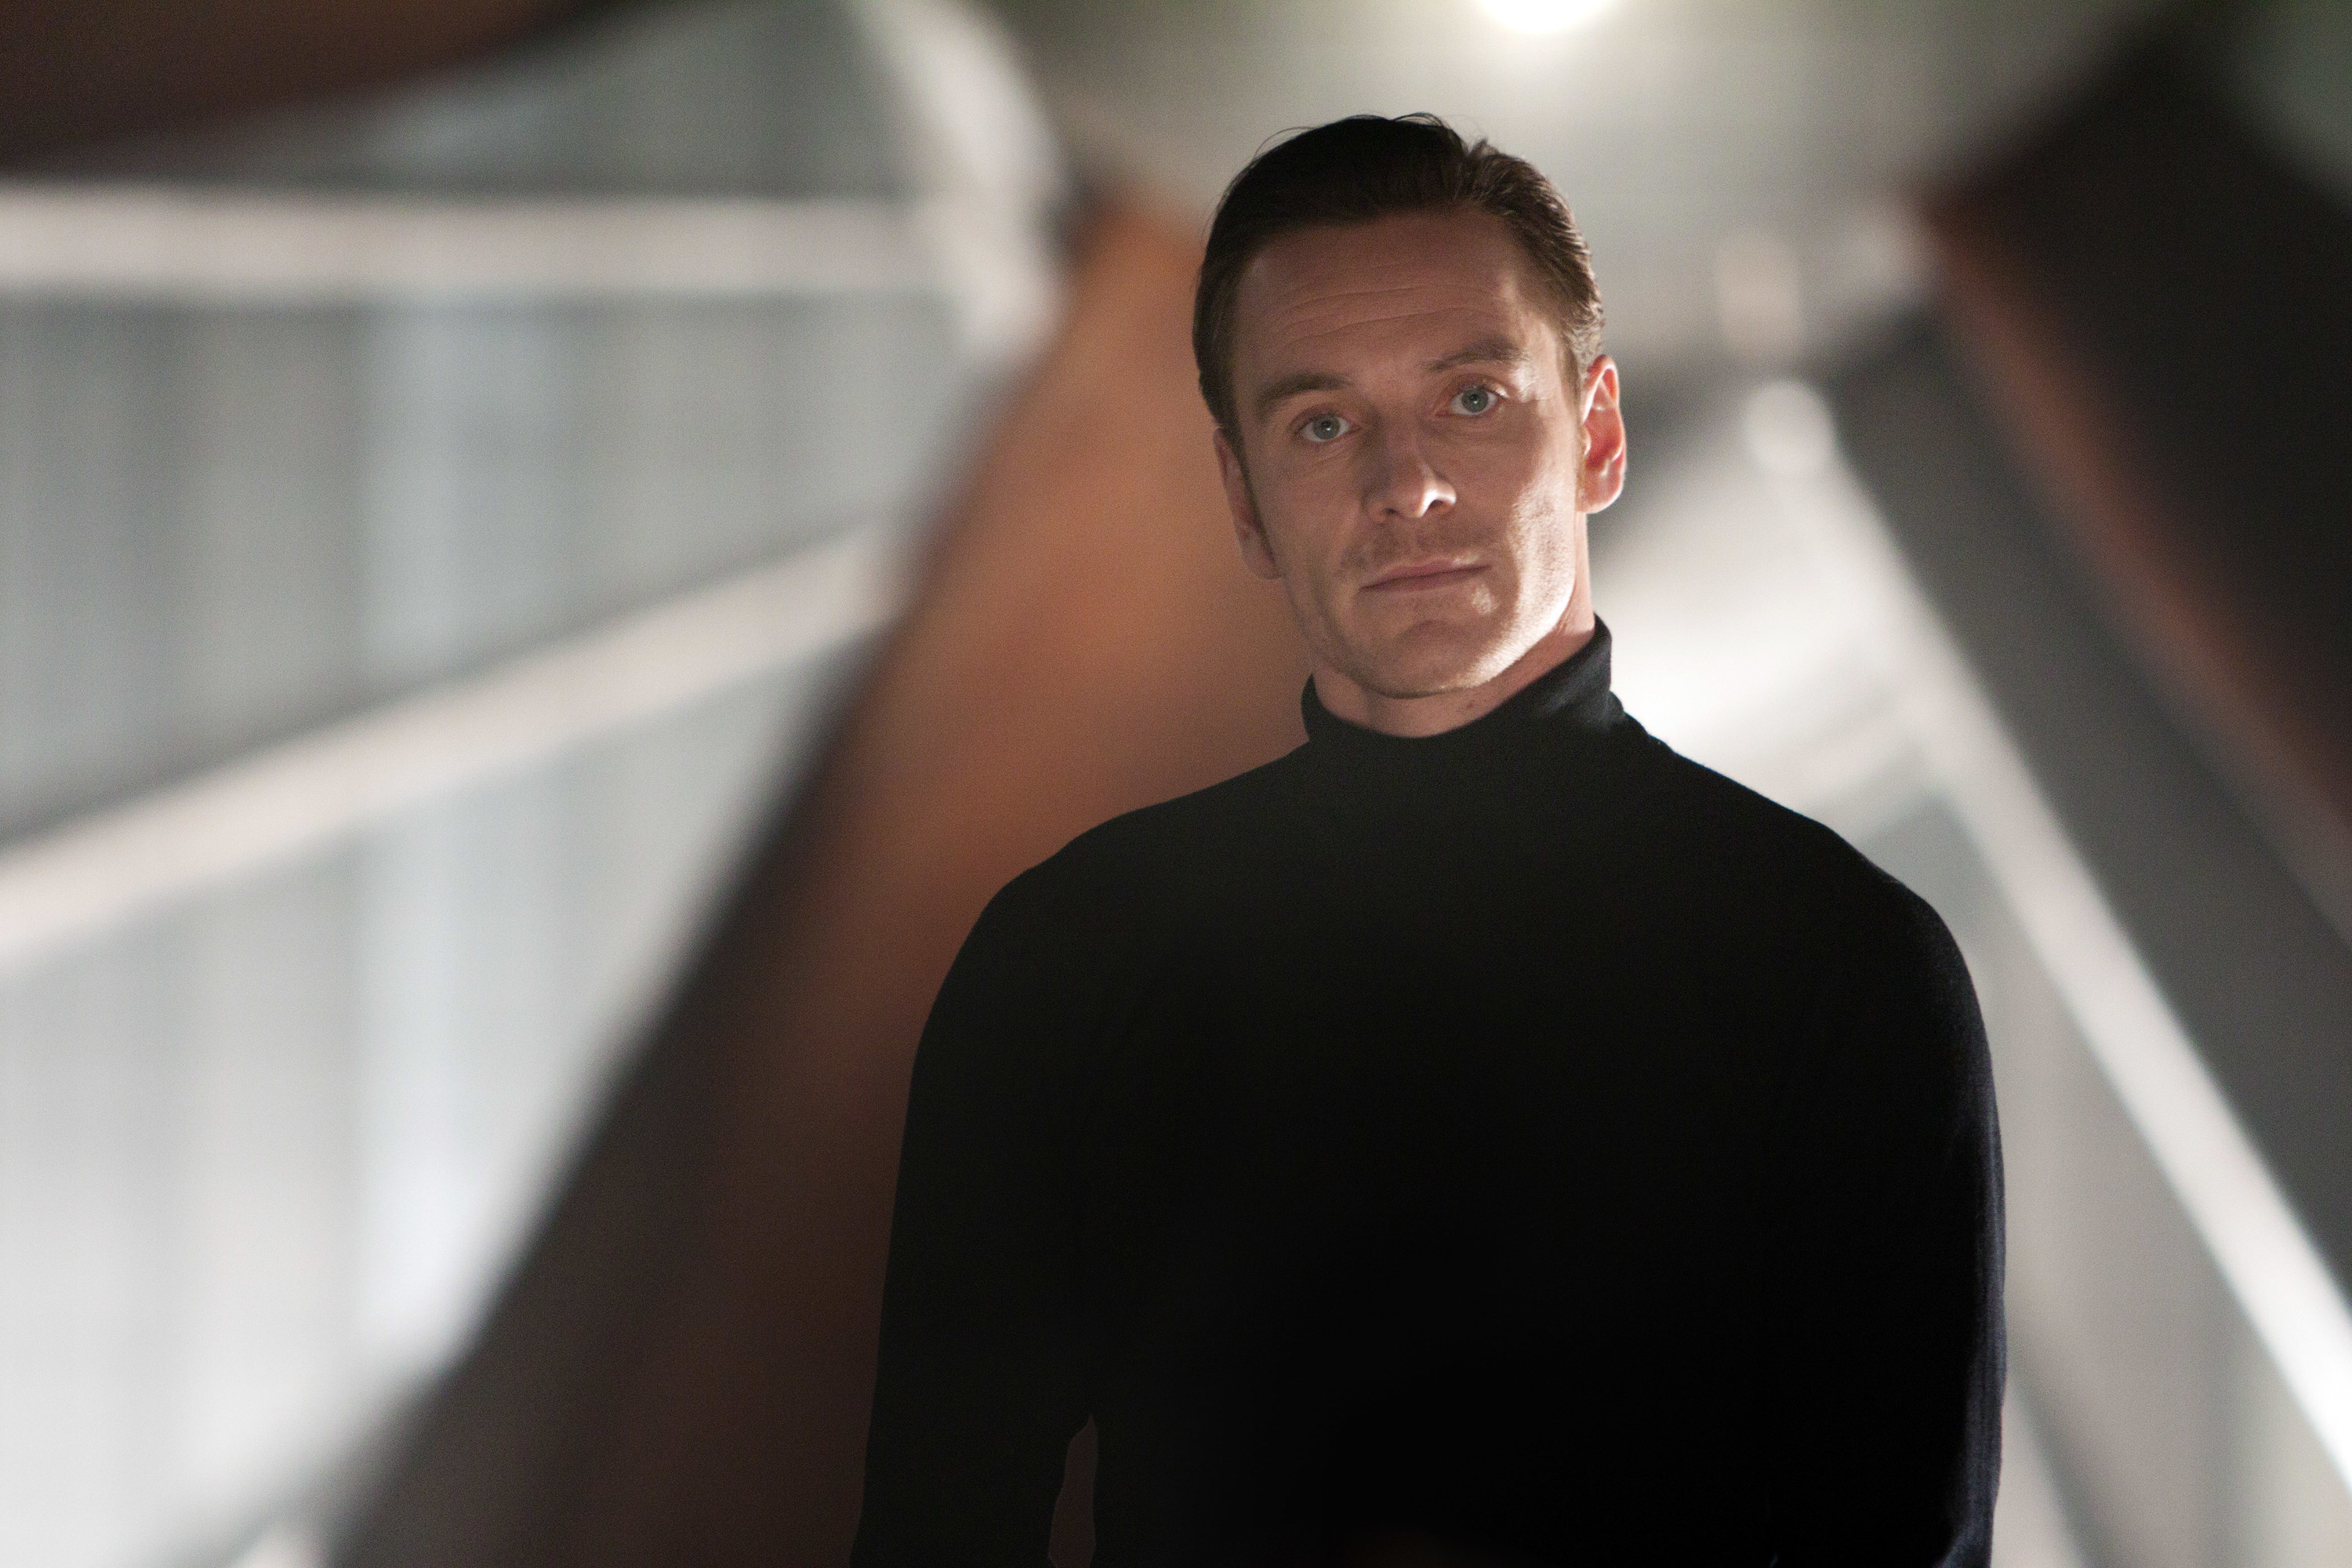 Michael Fassbender as Magneto stares into the camera